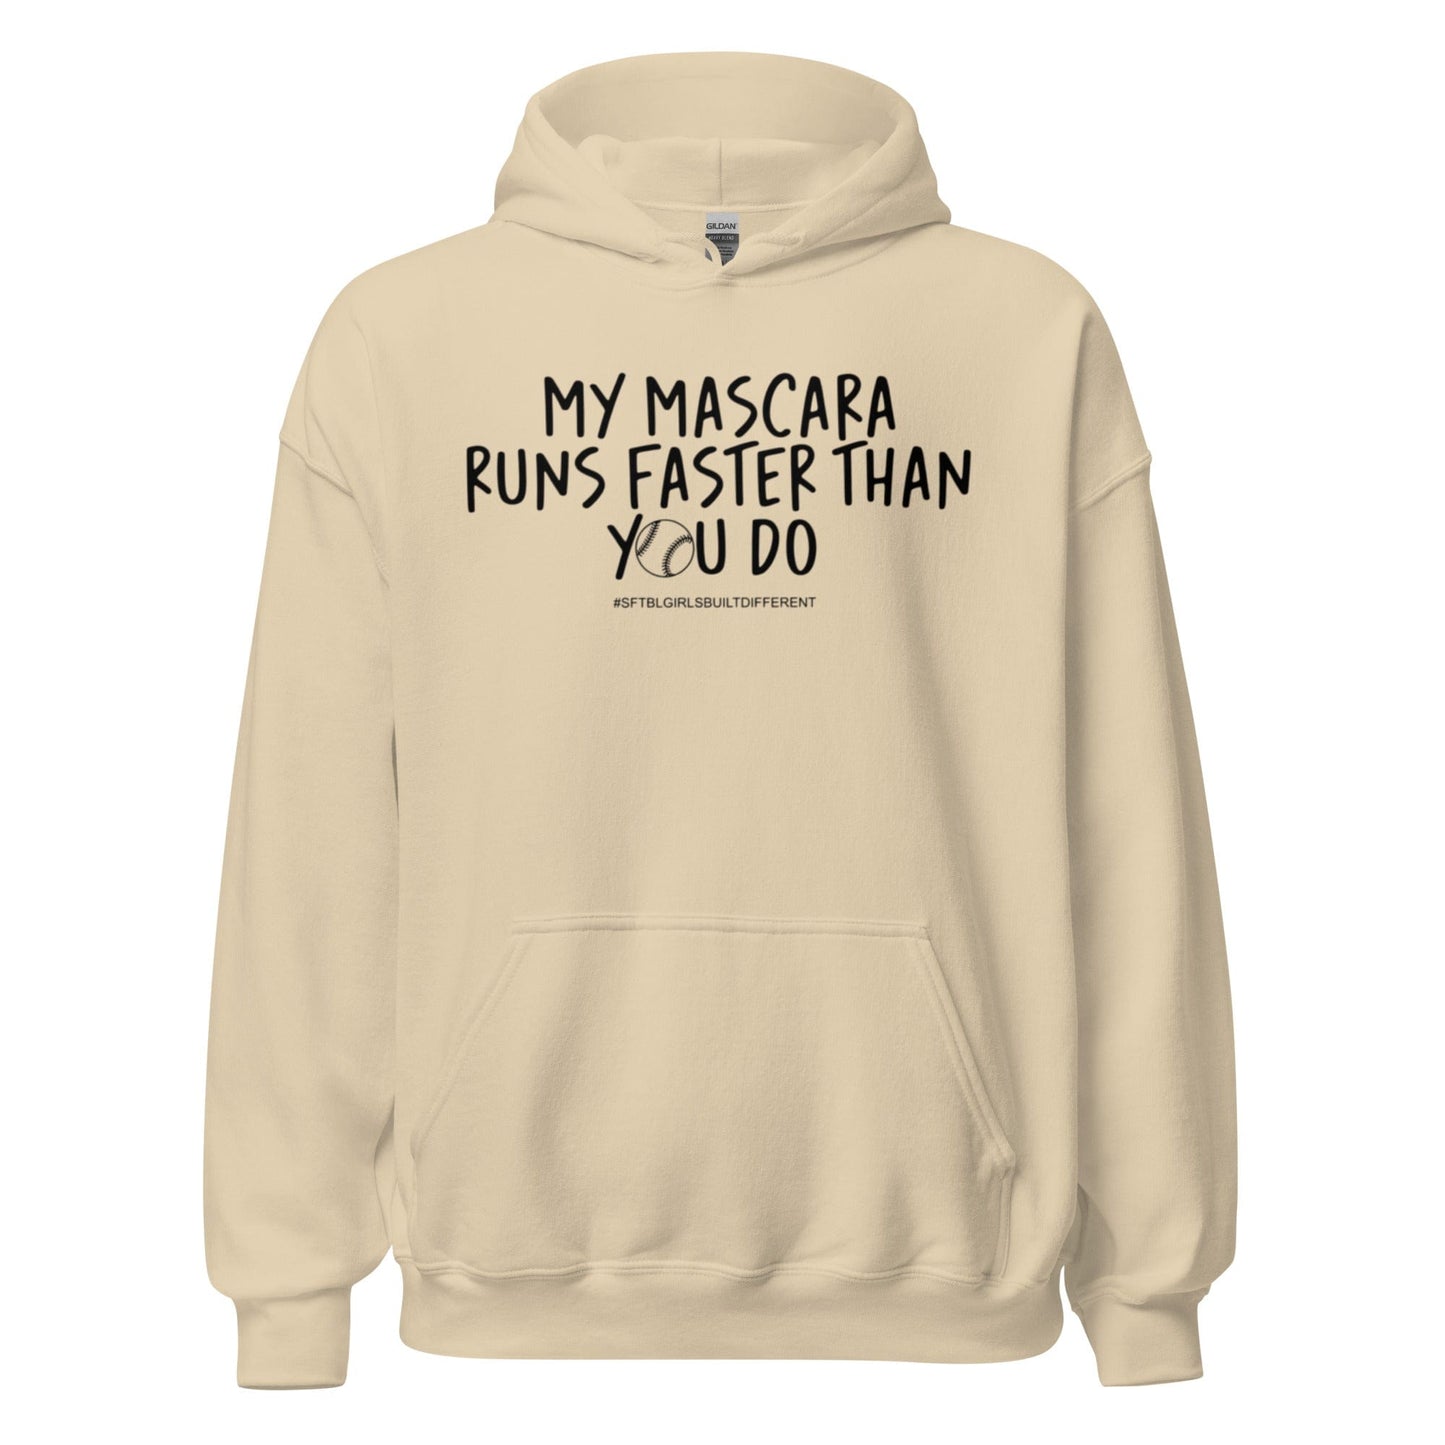 My Mascara Runs Faster Than You Do - Adult Hoodie